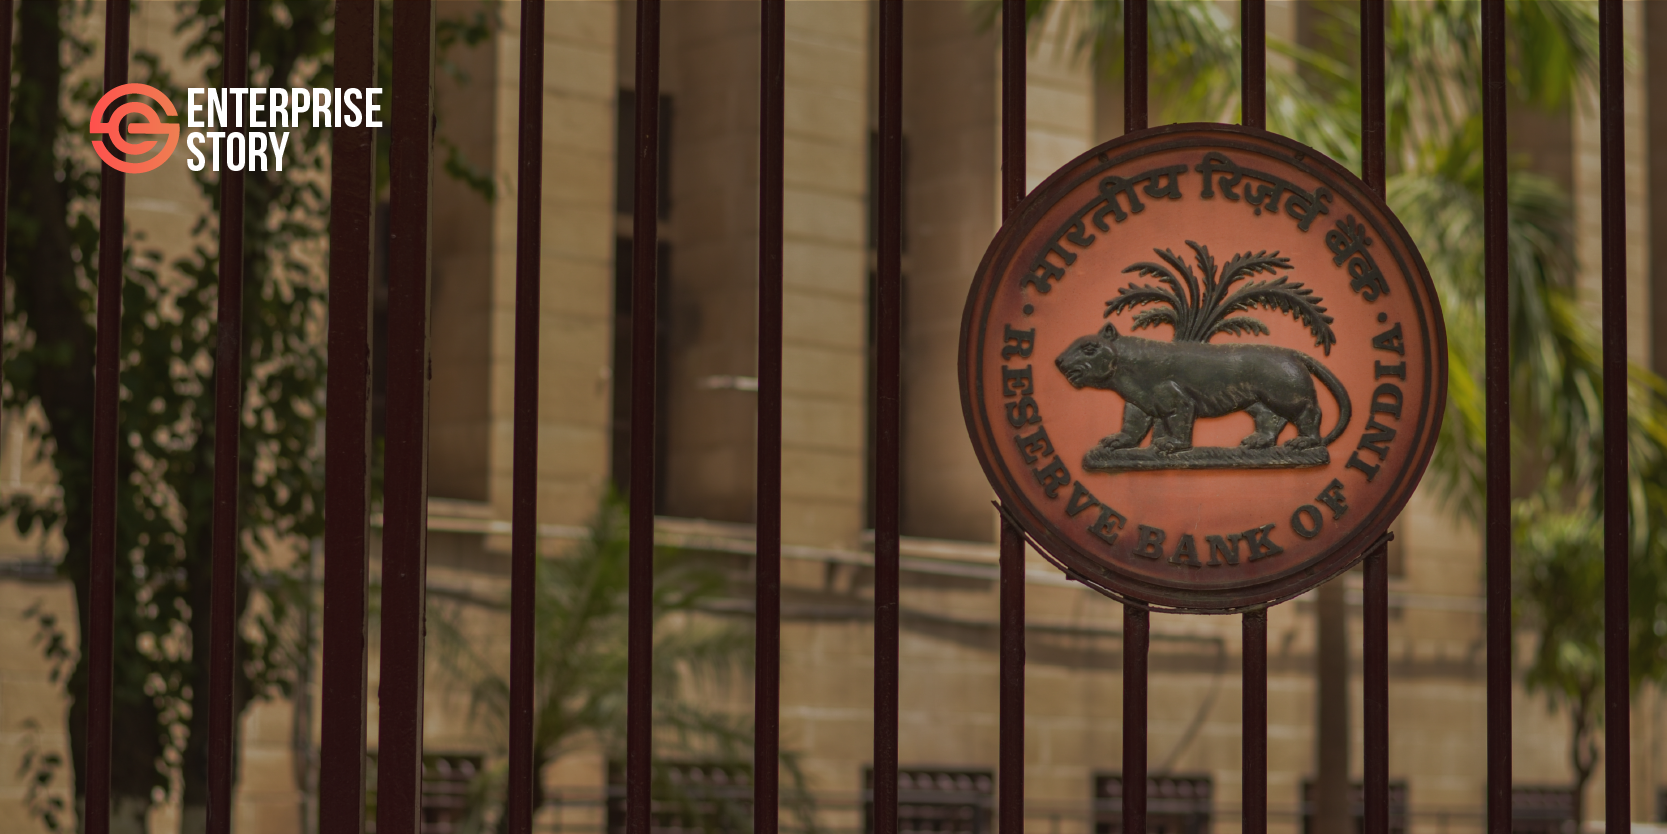 RBI examining use-cases to implement digital currency